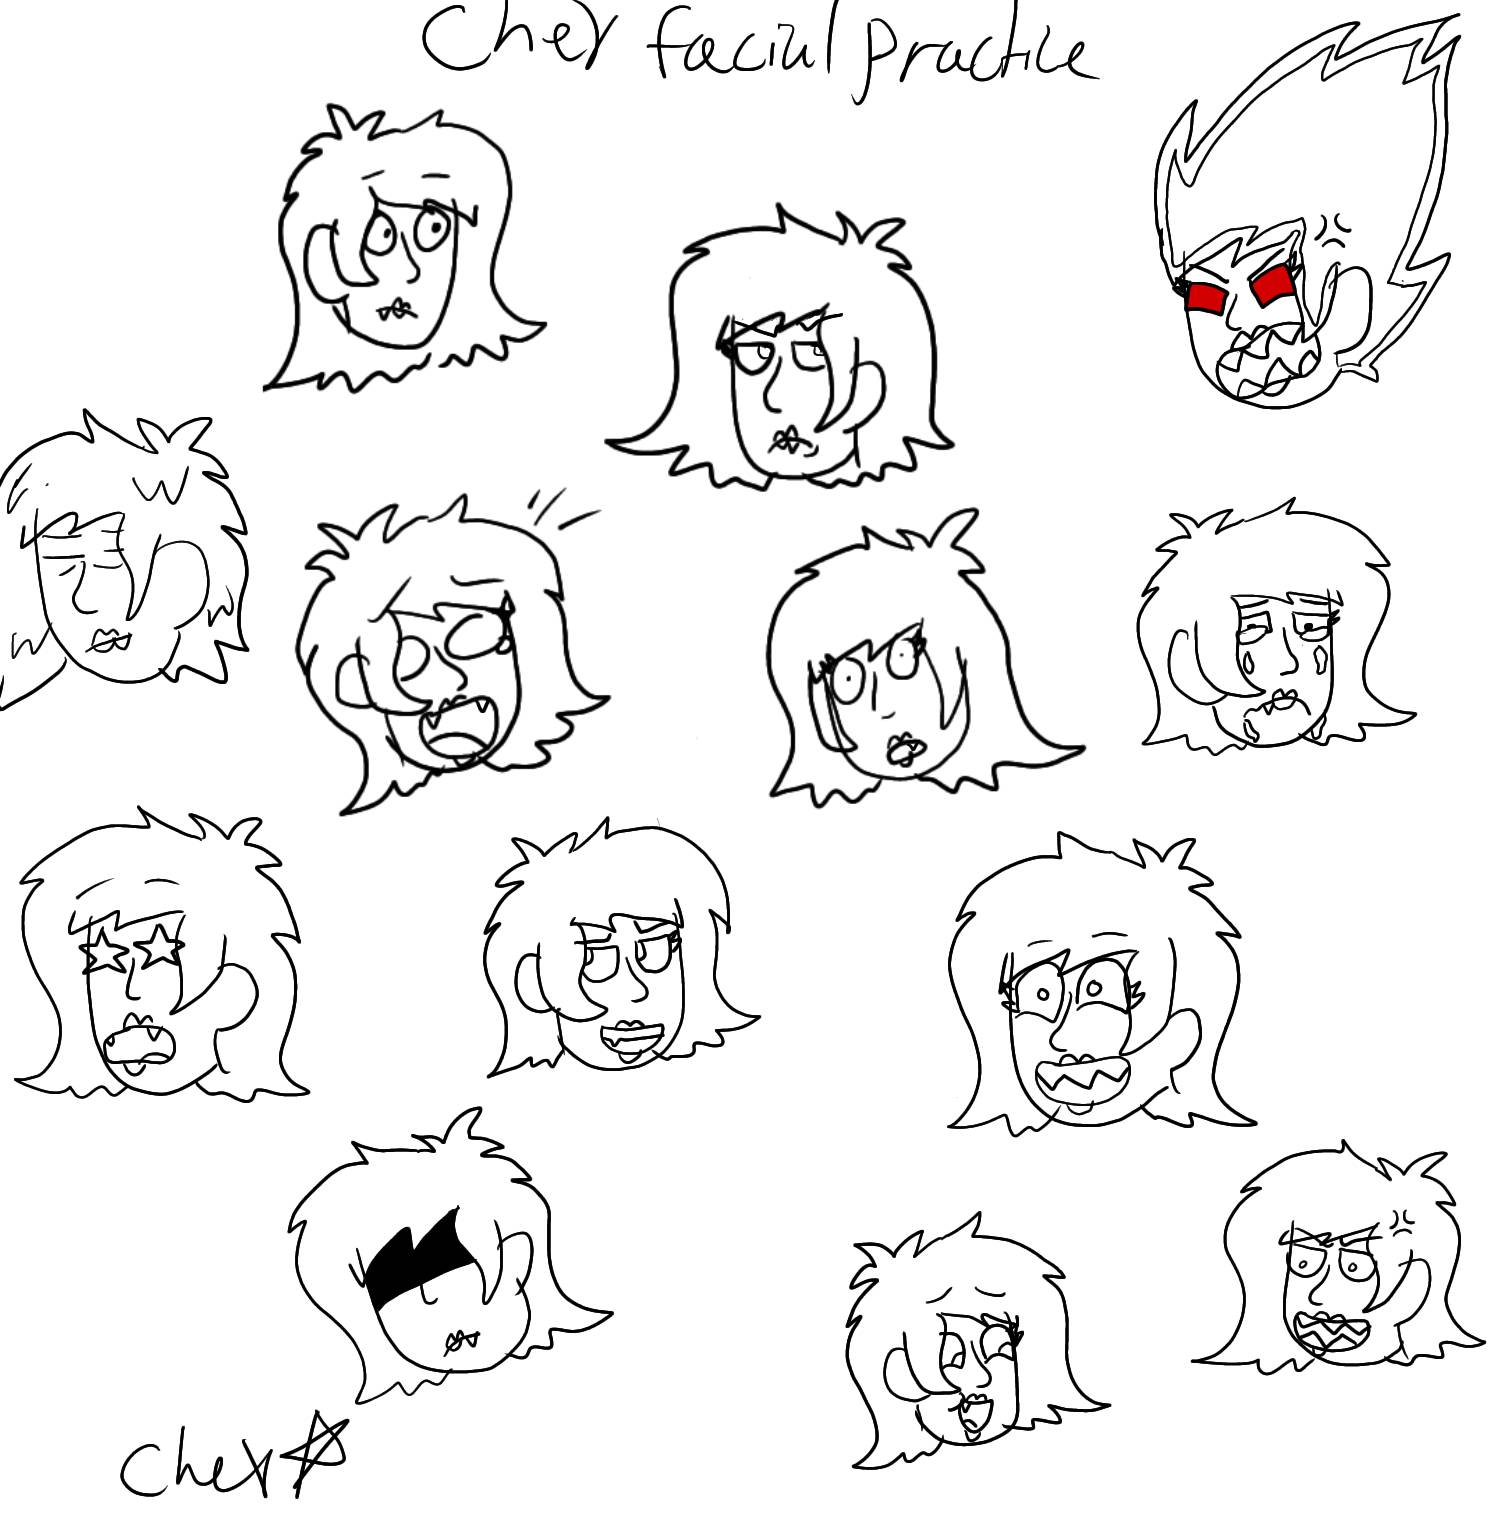 Chey facial practice by AetherChey on DeviantArt